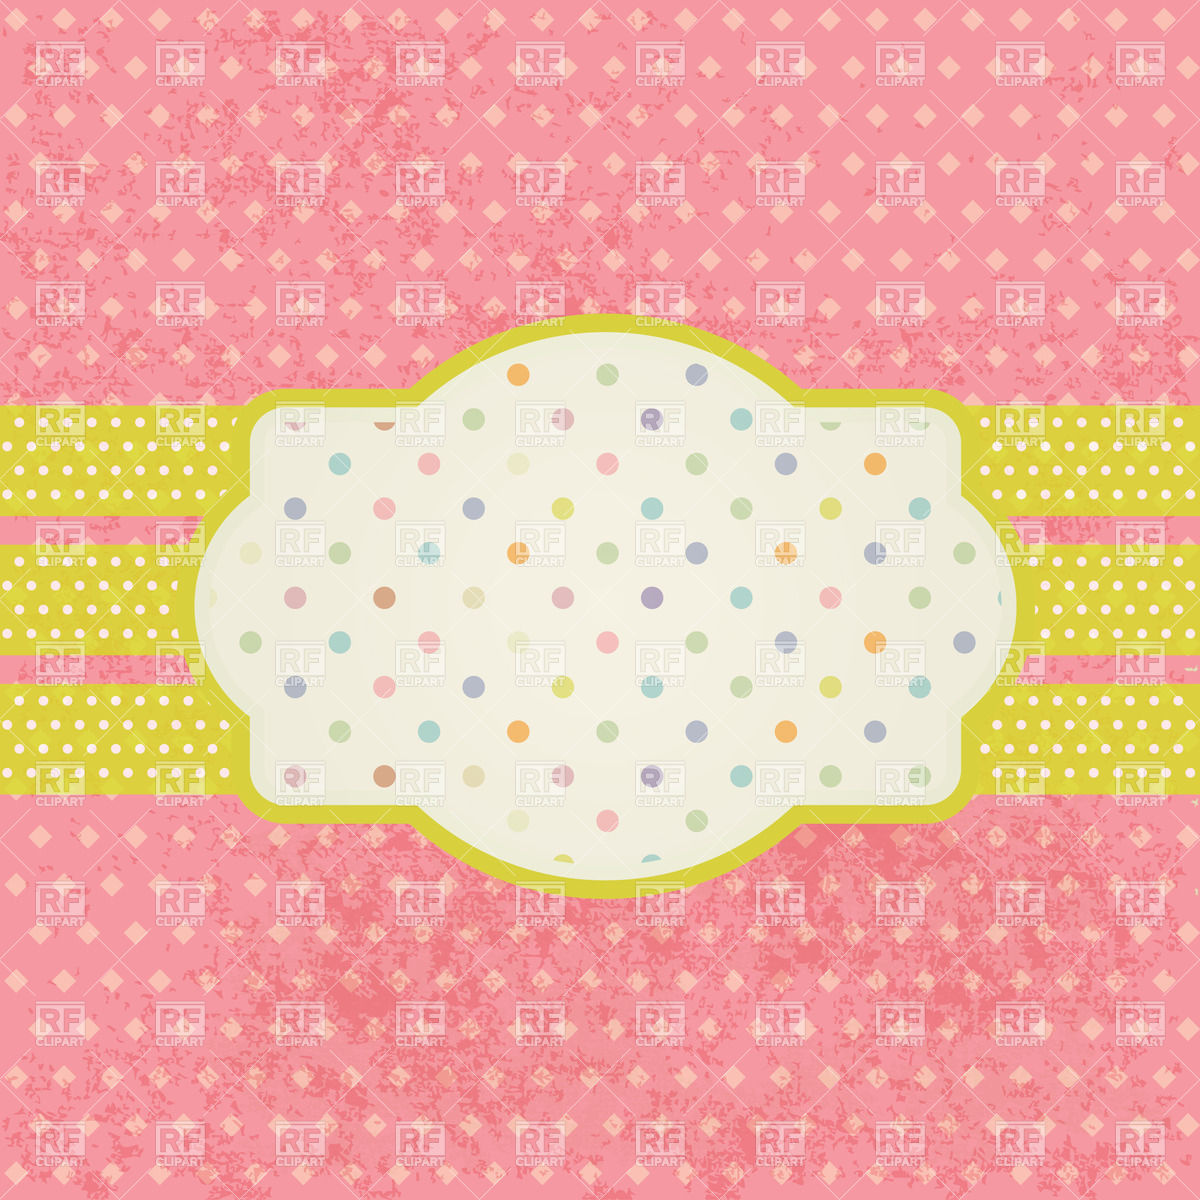 Vintage Frame For Text On Polka Dot Background 22832 Borders And